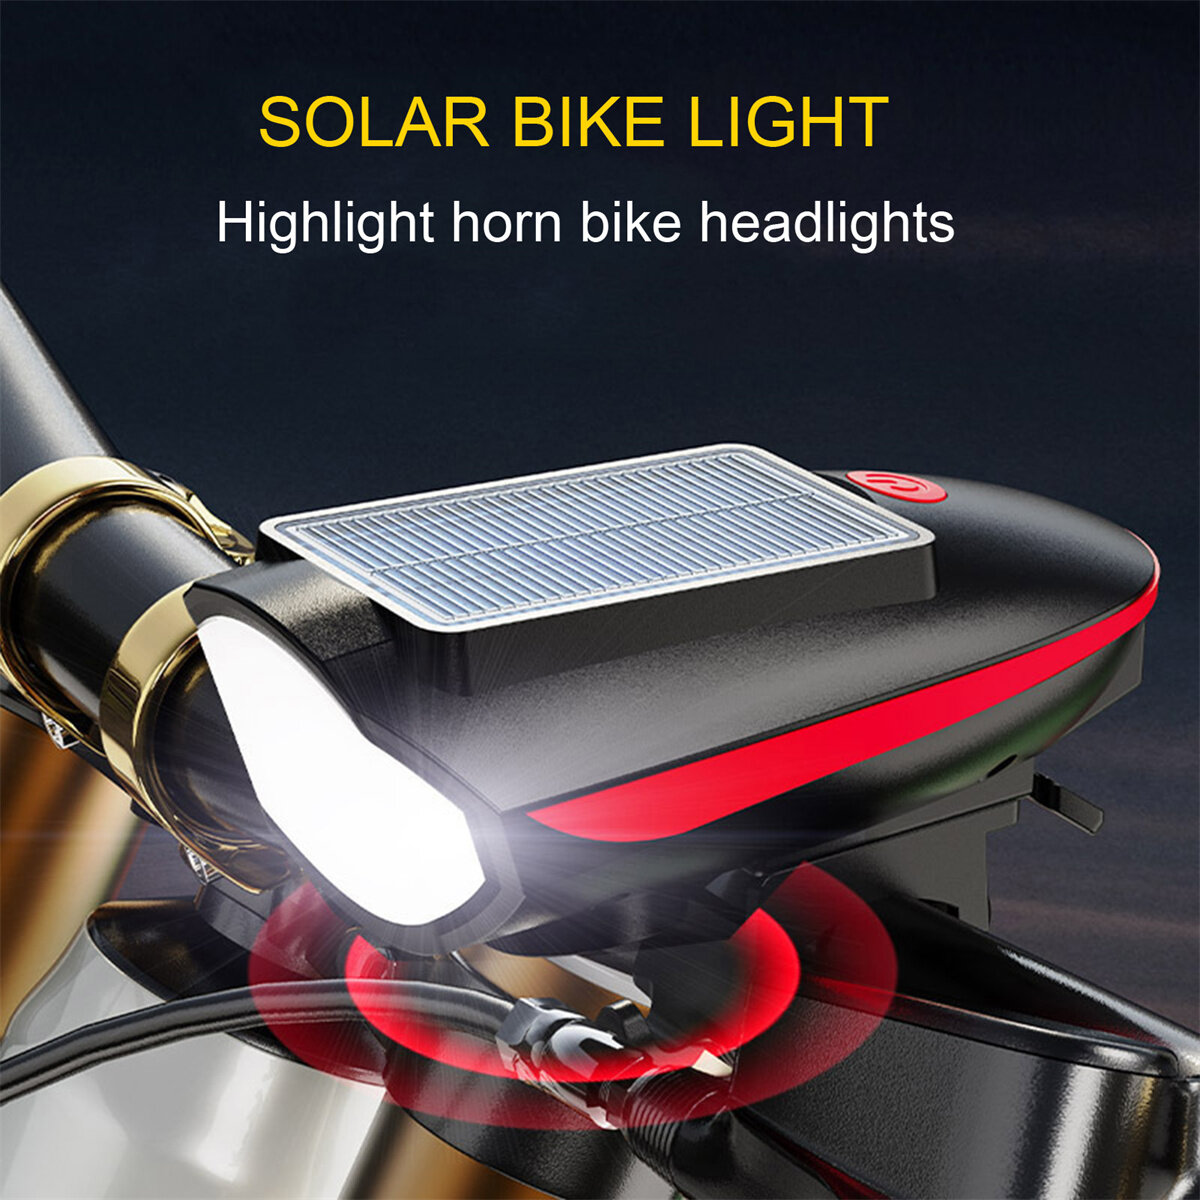 Cansses 3 in 1 Solar Bike Headlight XPE Lamp Beads 1200mAh Battery Waterproof 3 Light Modes with 120db Horn for Night Cycling COD